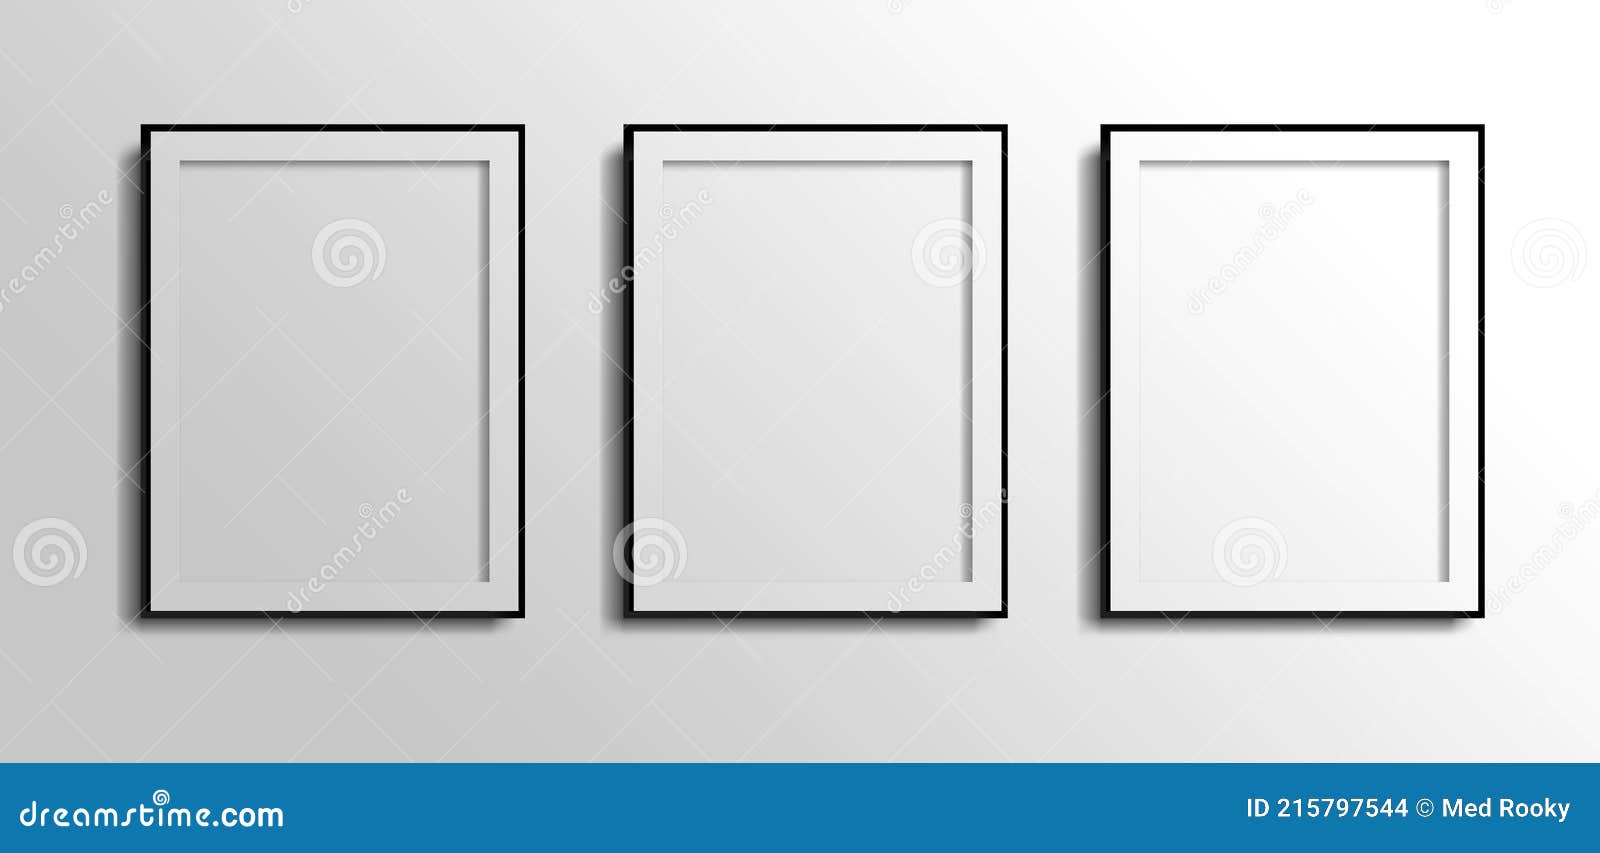 three vertical fotos frames, 3d white blank on grey white wall with black borders. 3 fotos